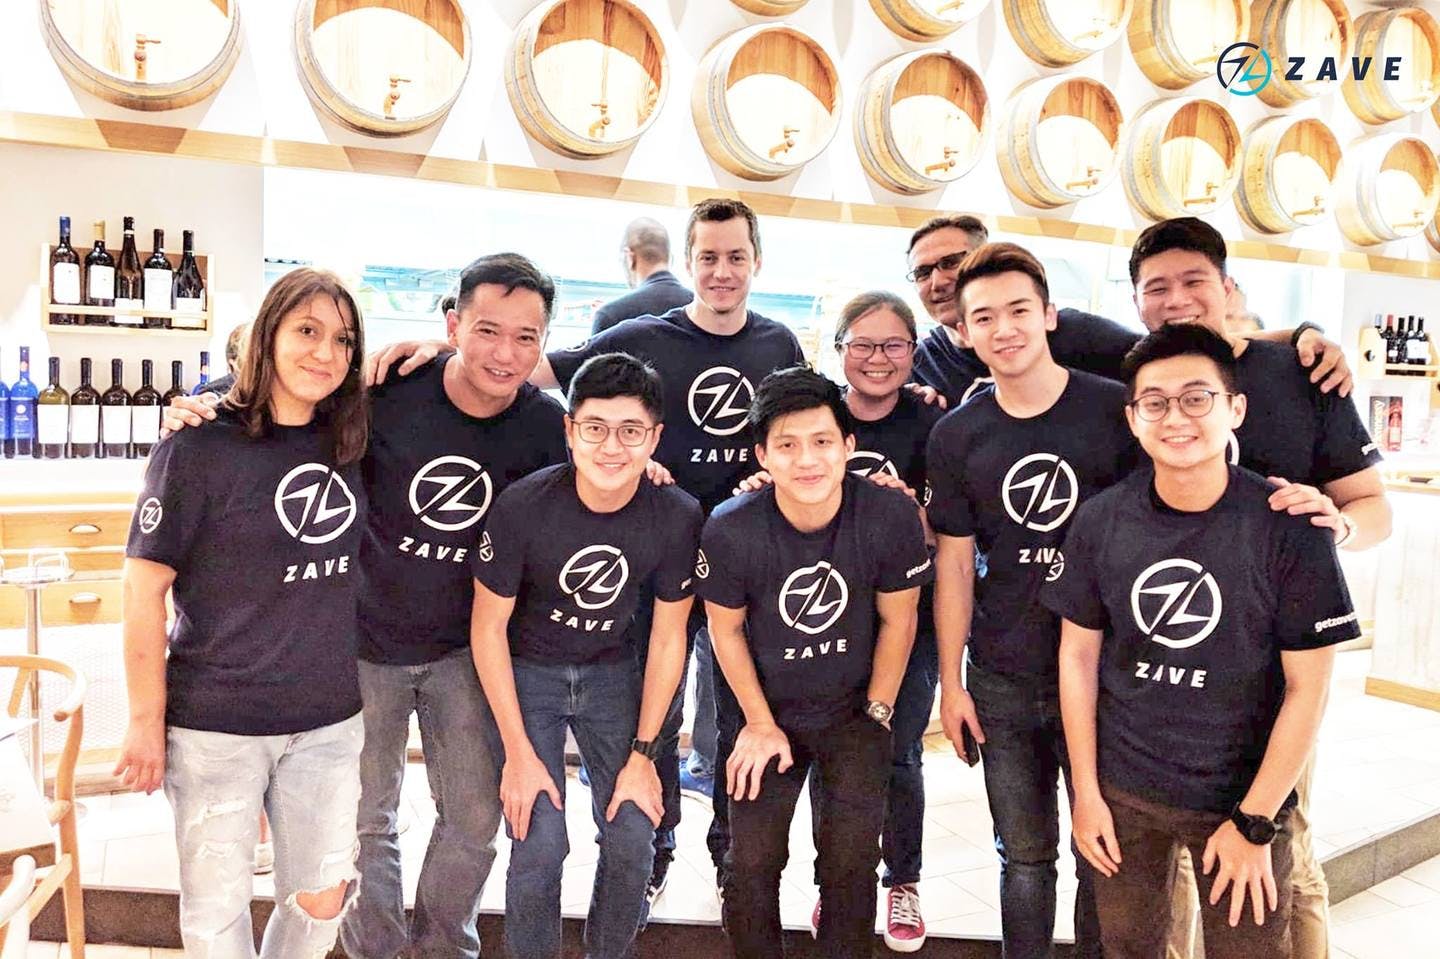 Zave employees group photo